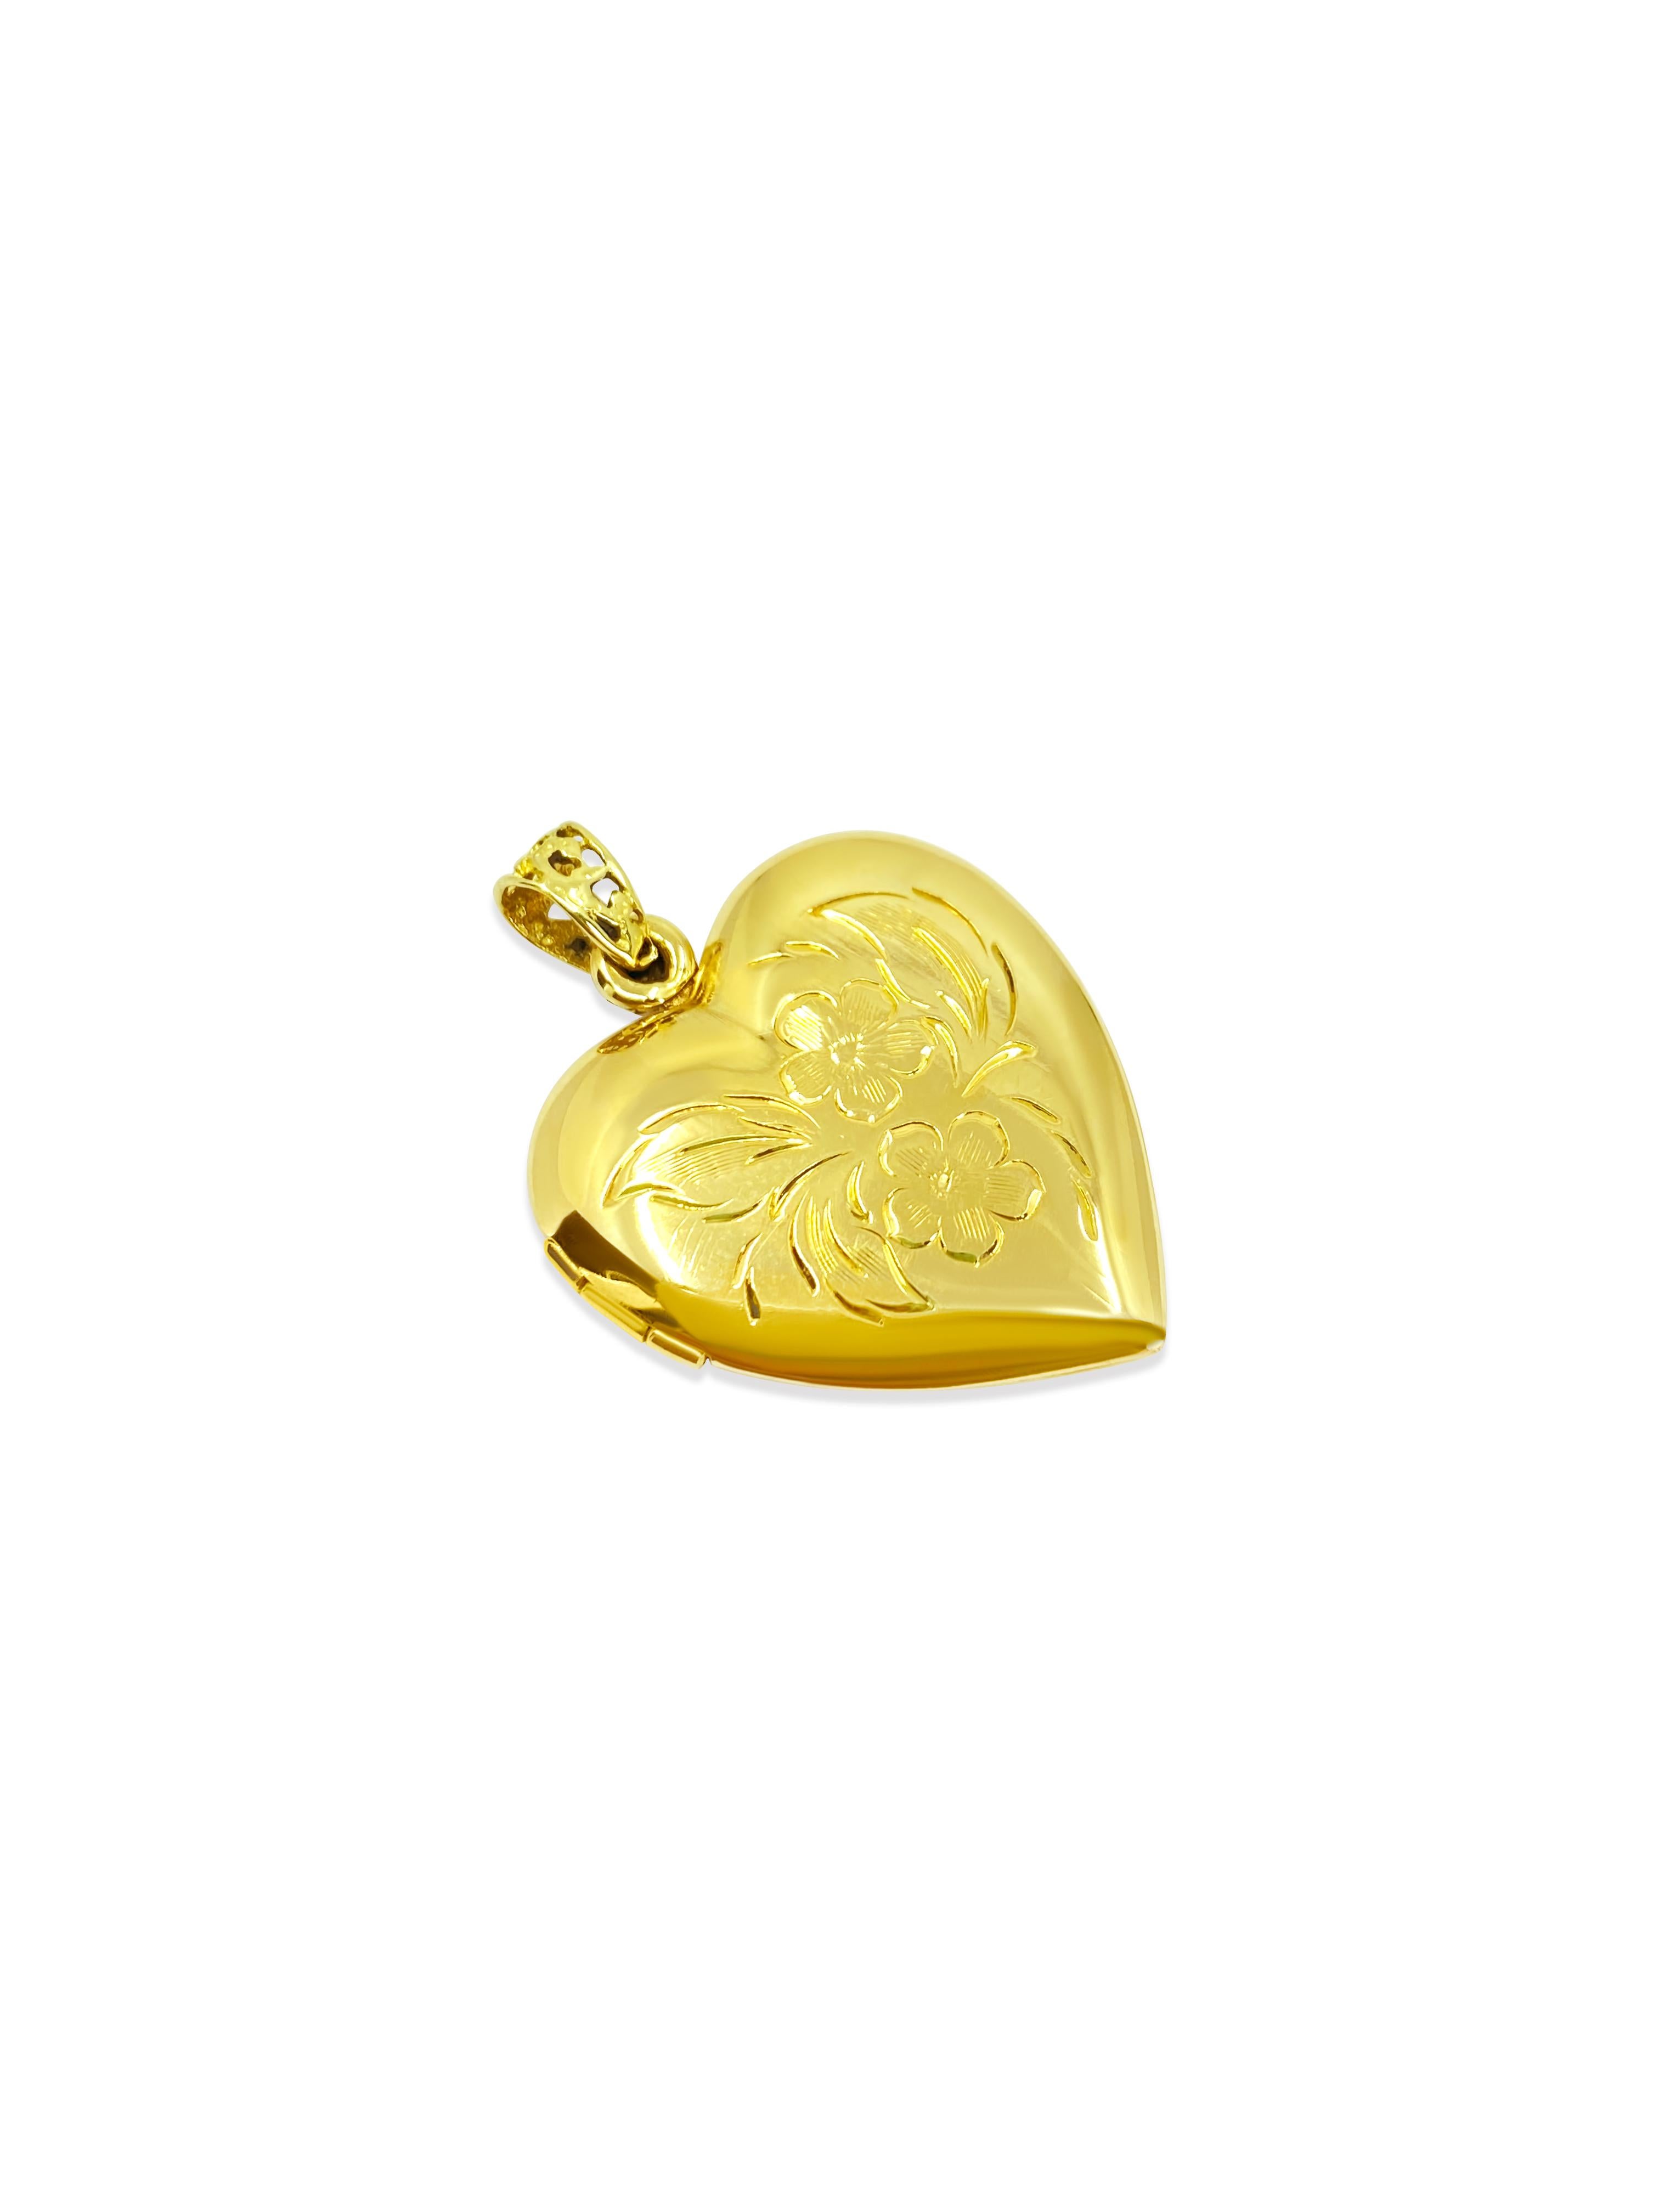 Vintage Heart Picture Pendant For Her in 14k Gold  For Sale 1